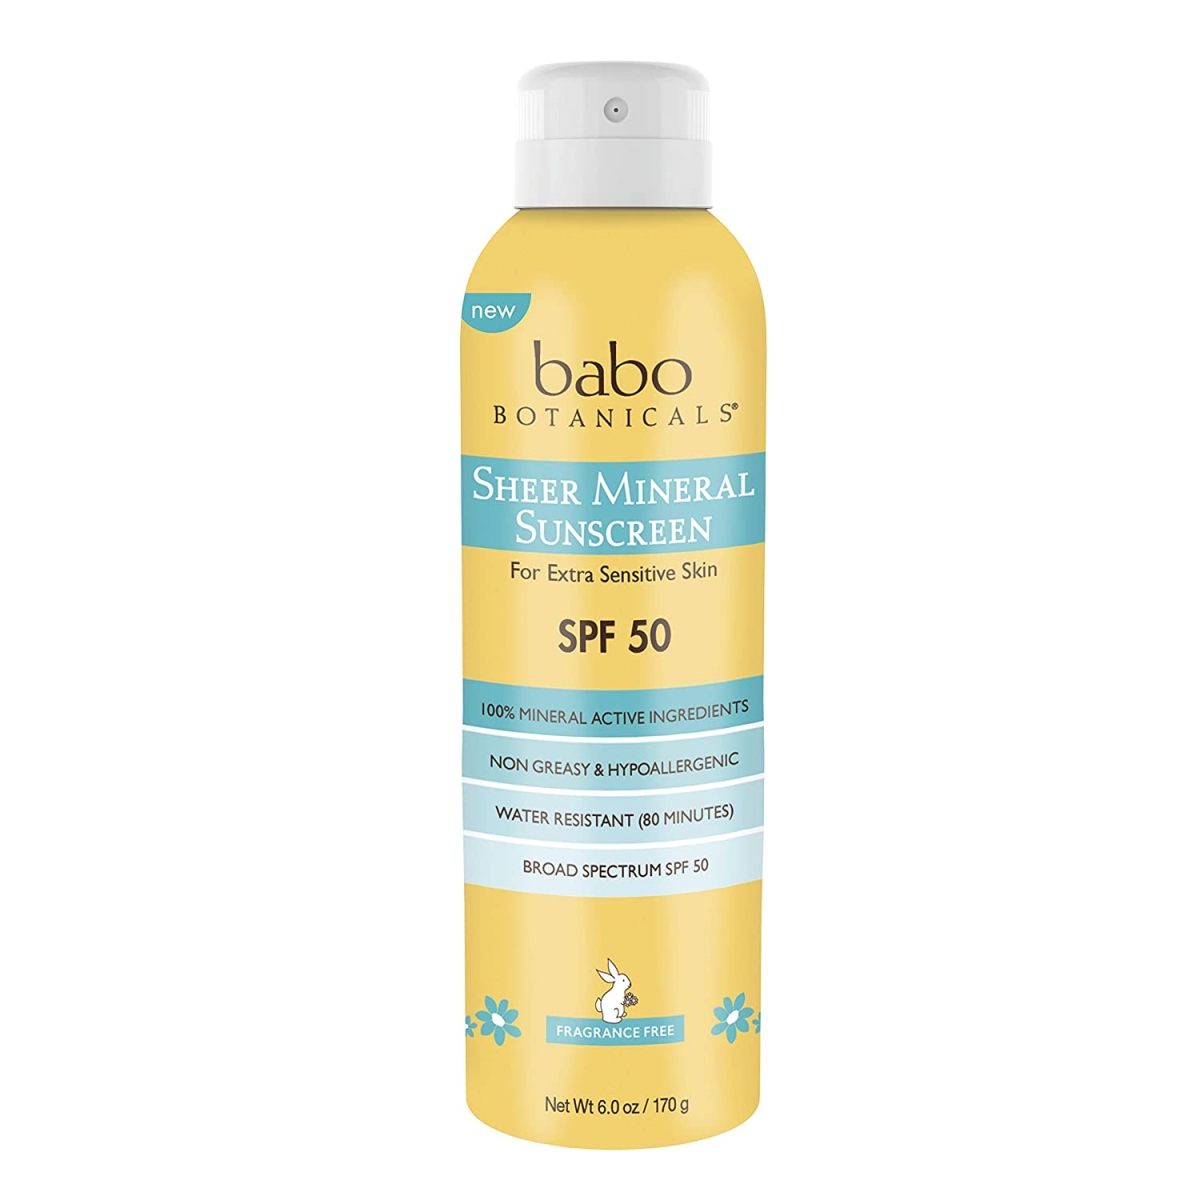 Picture of Babo Botanicals 238030 6 oz Sheer Mineral Sunscreen Spray with SPF50